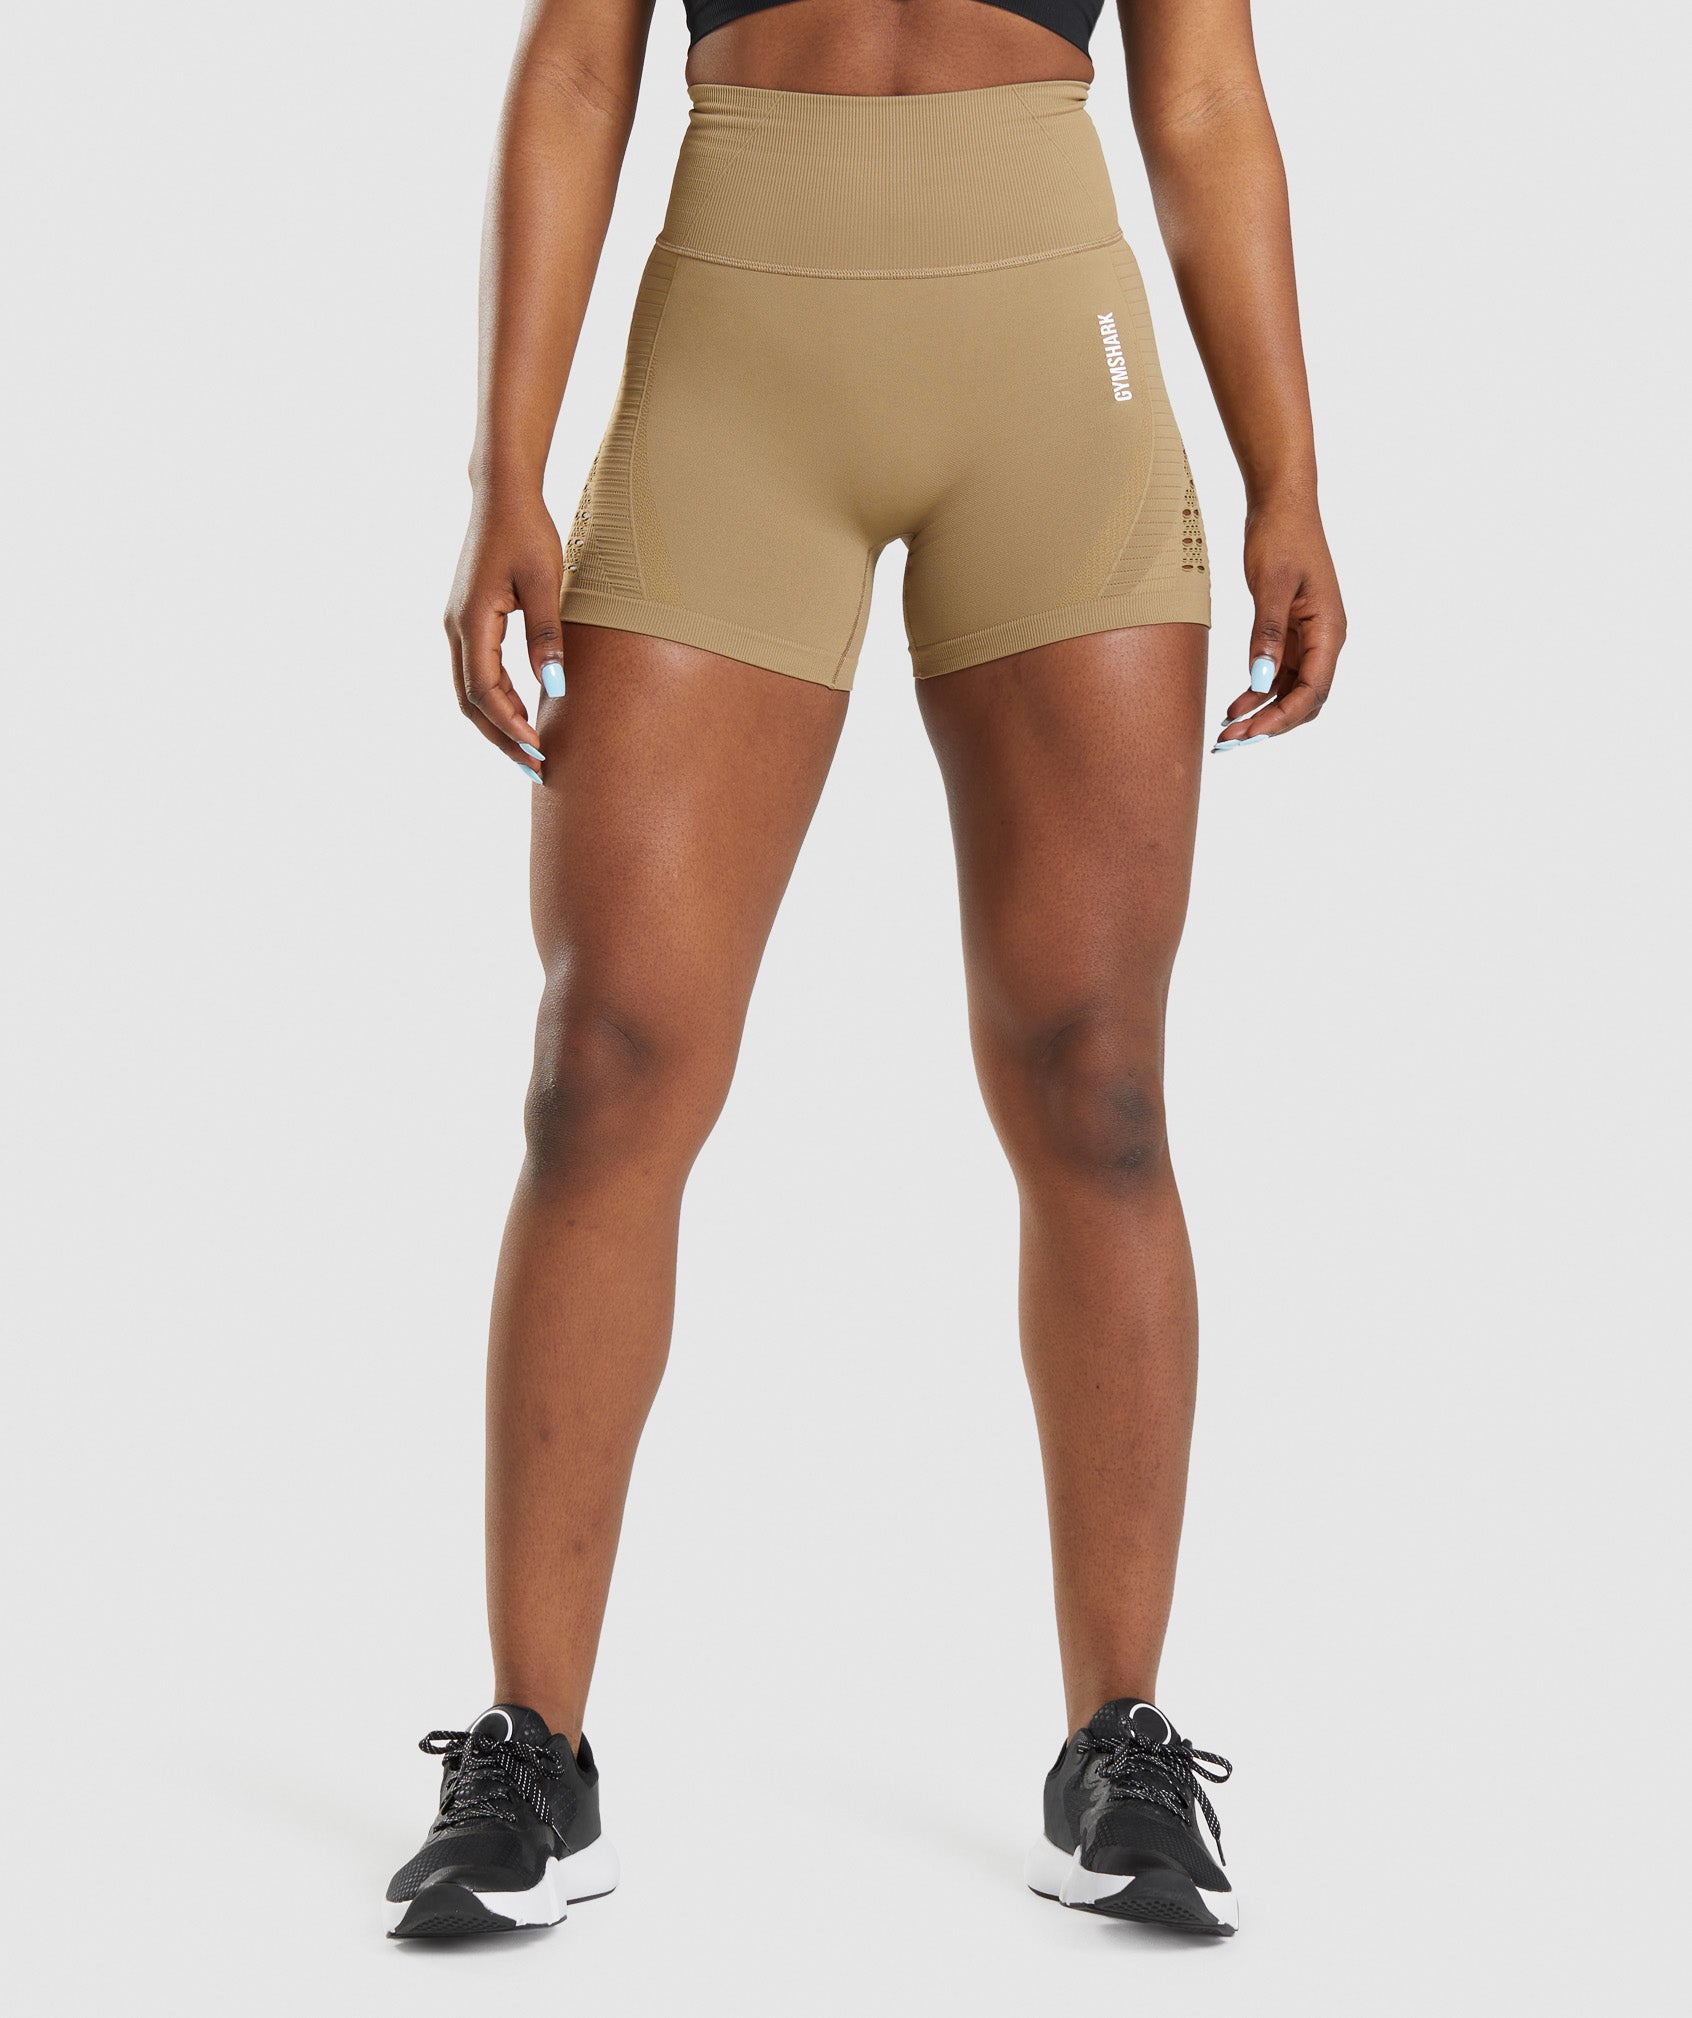 Gymshark Compression High Wasted Shorts Women's Energy+ Seamless